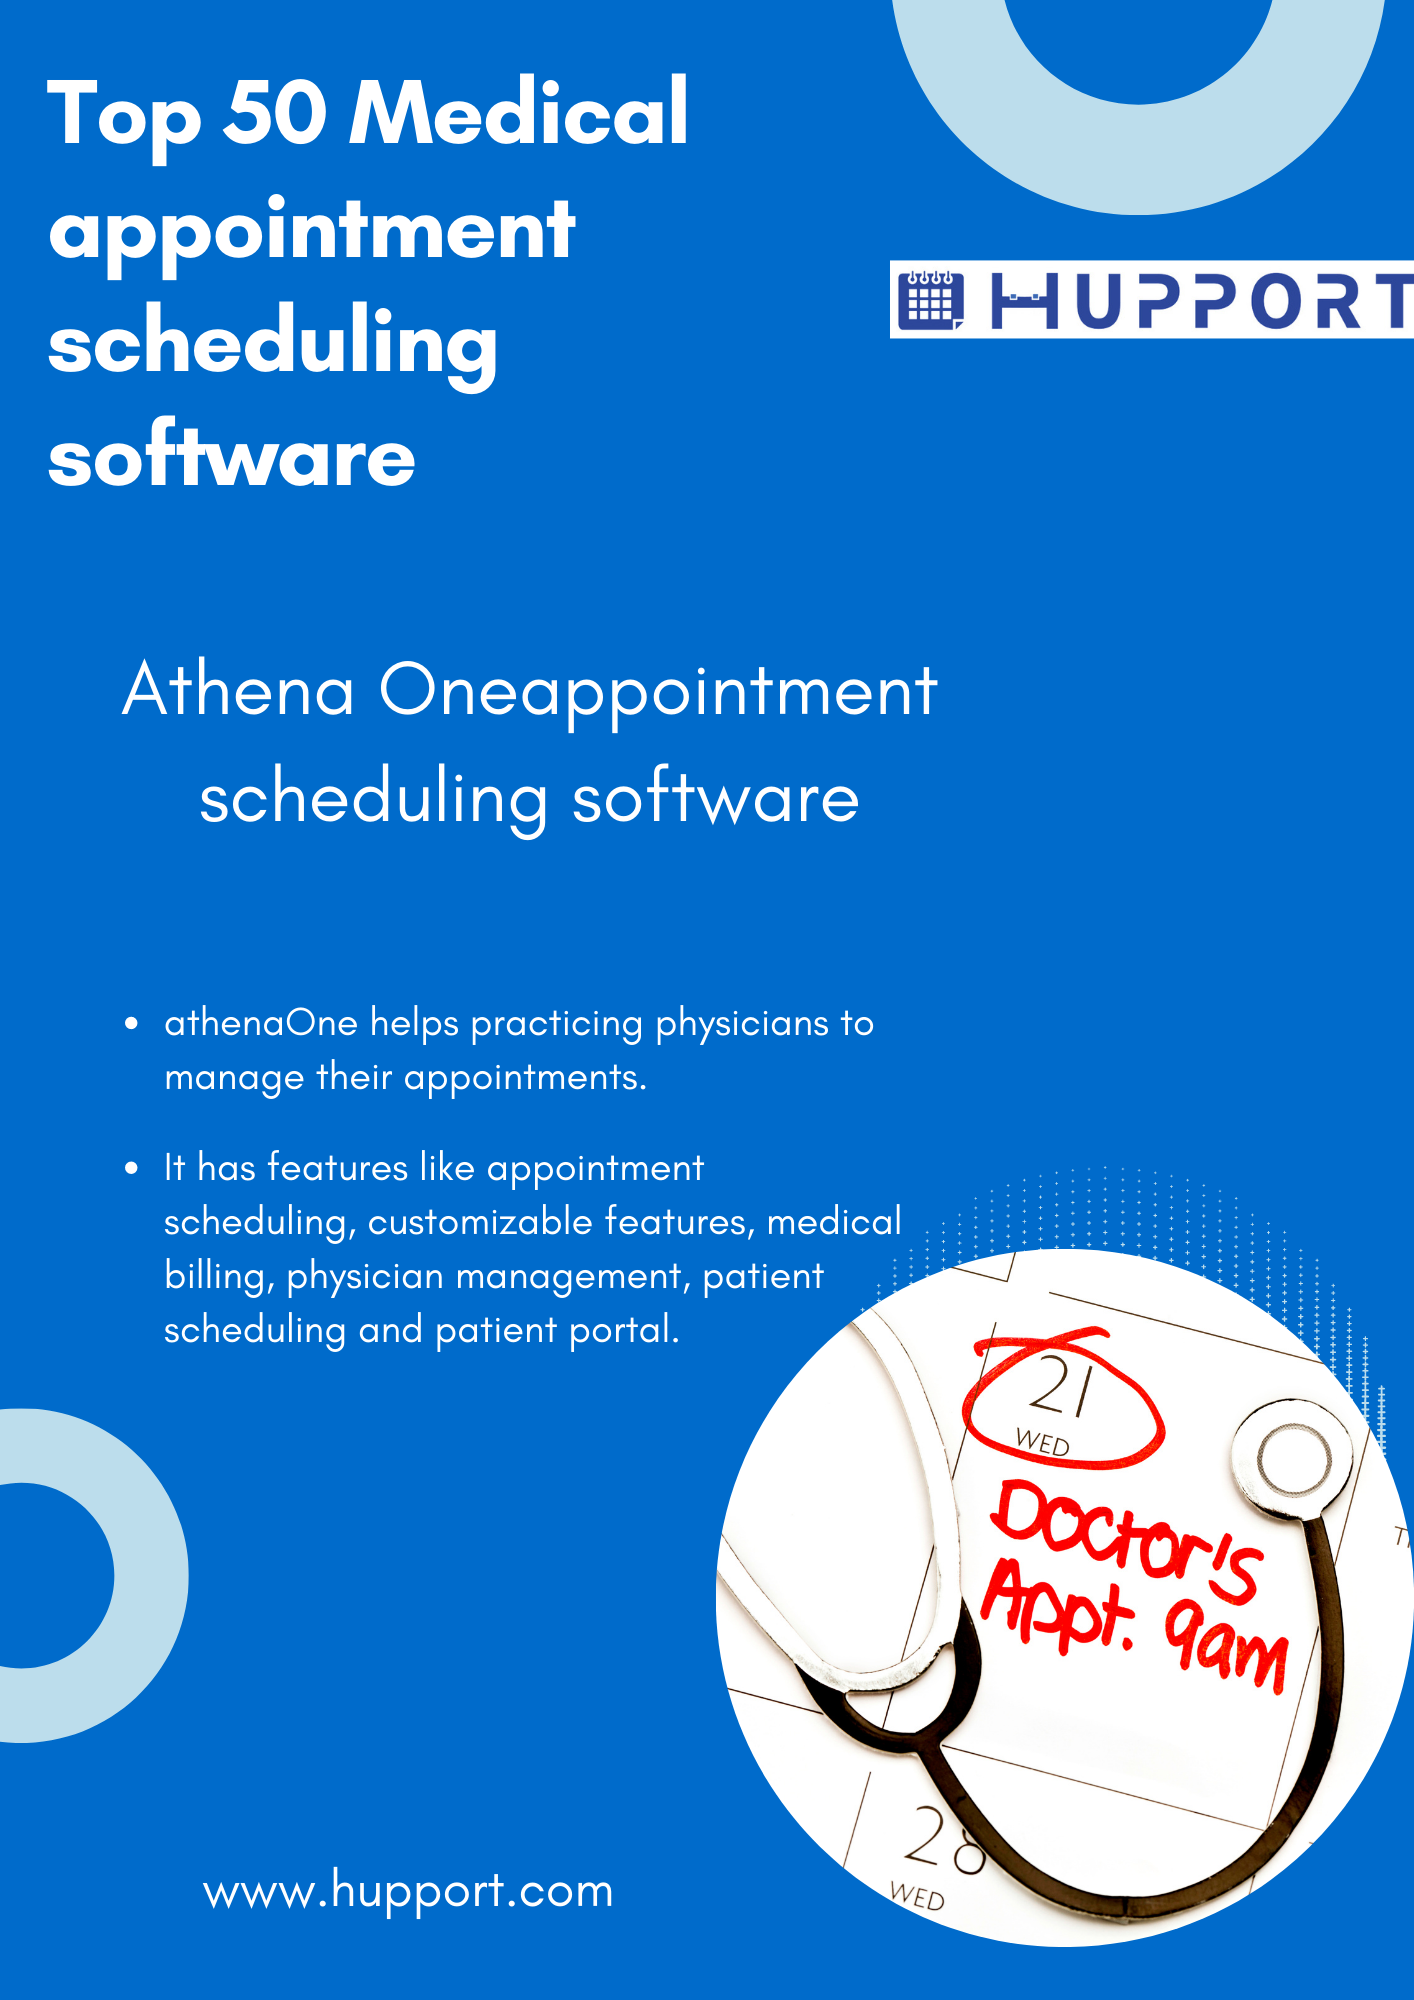 Athena One appointment scheduling software